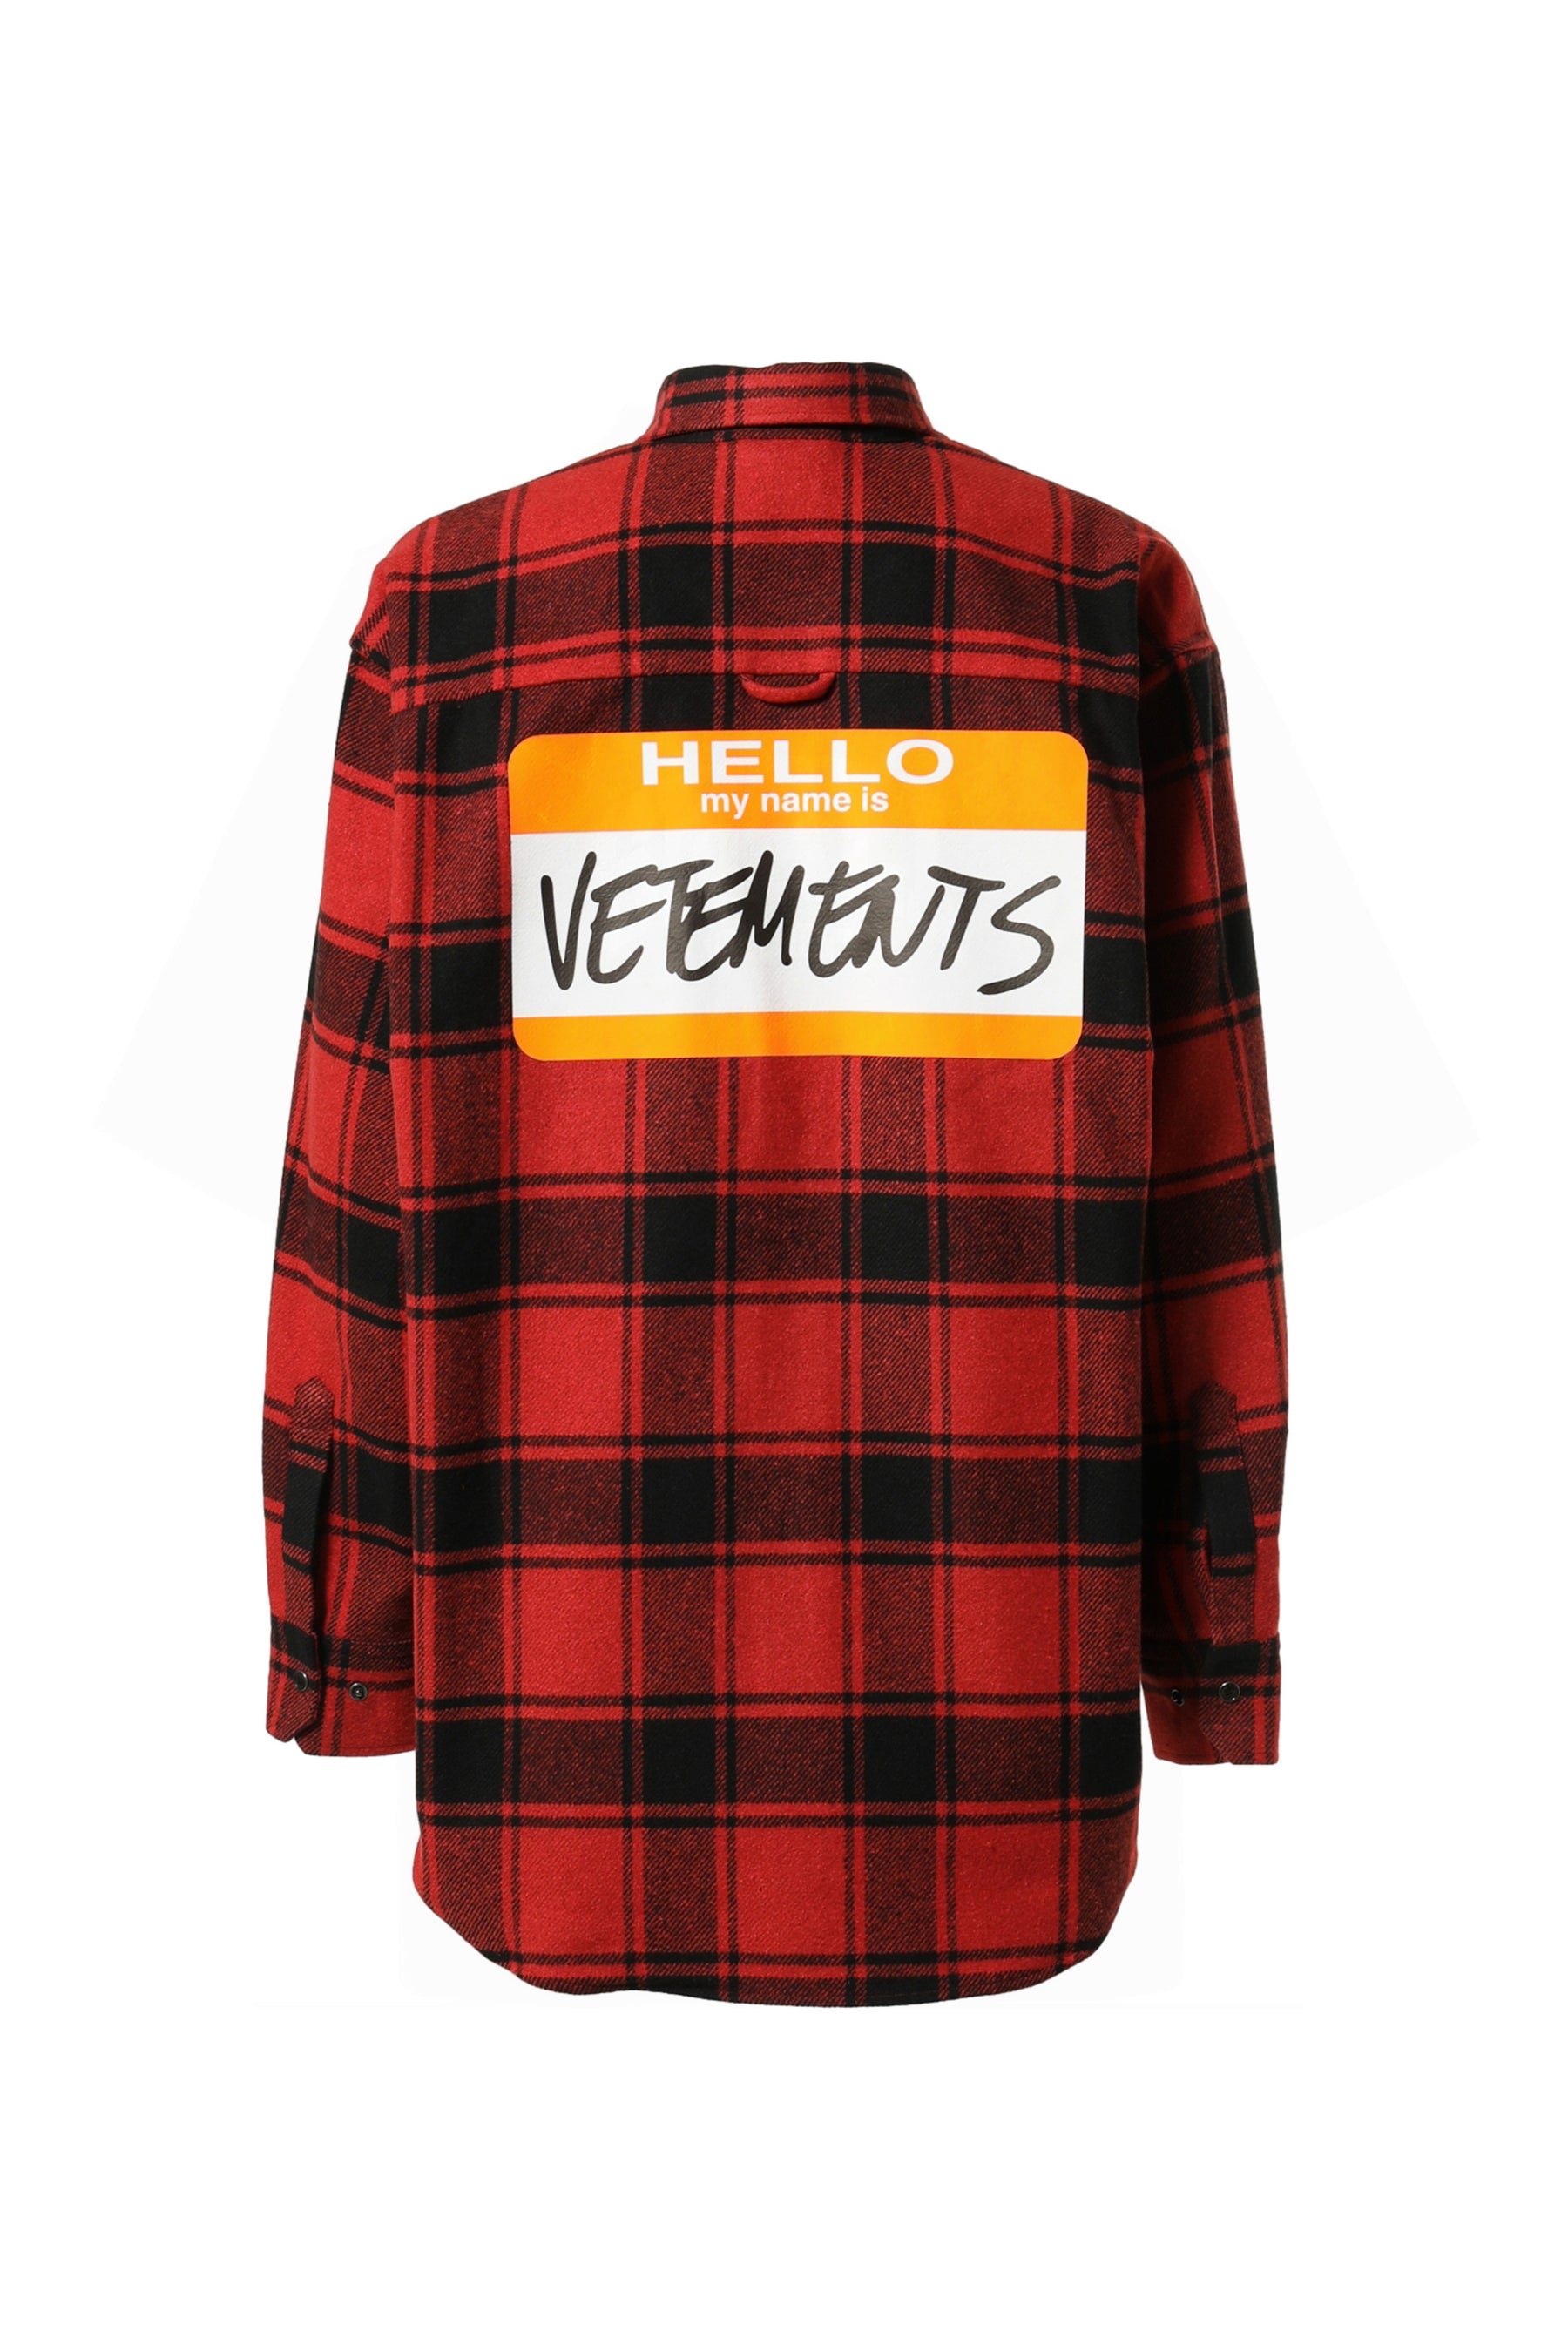 VETEMENTS ヴェトモン FW23 MY NAME IS VETEMENTS FLANNEL SHIRT / RED